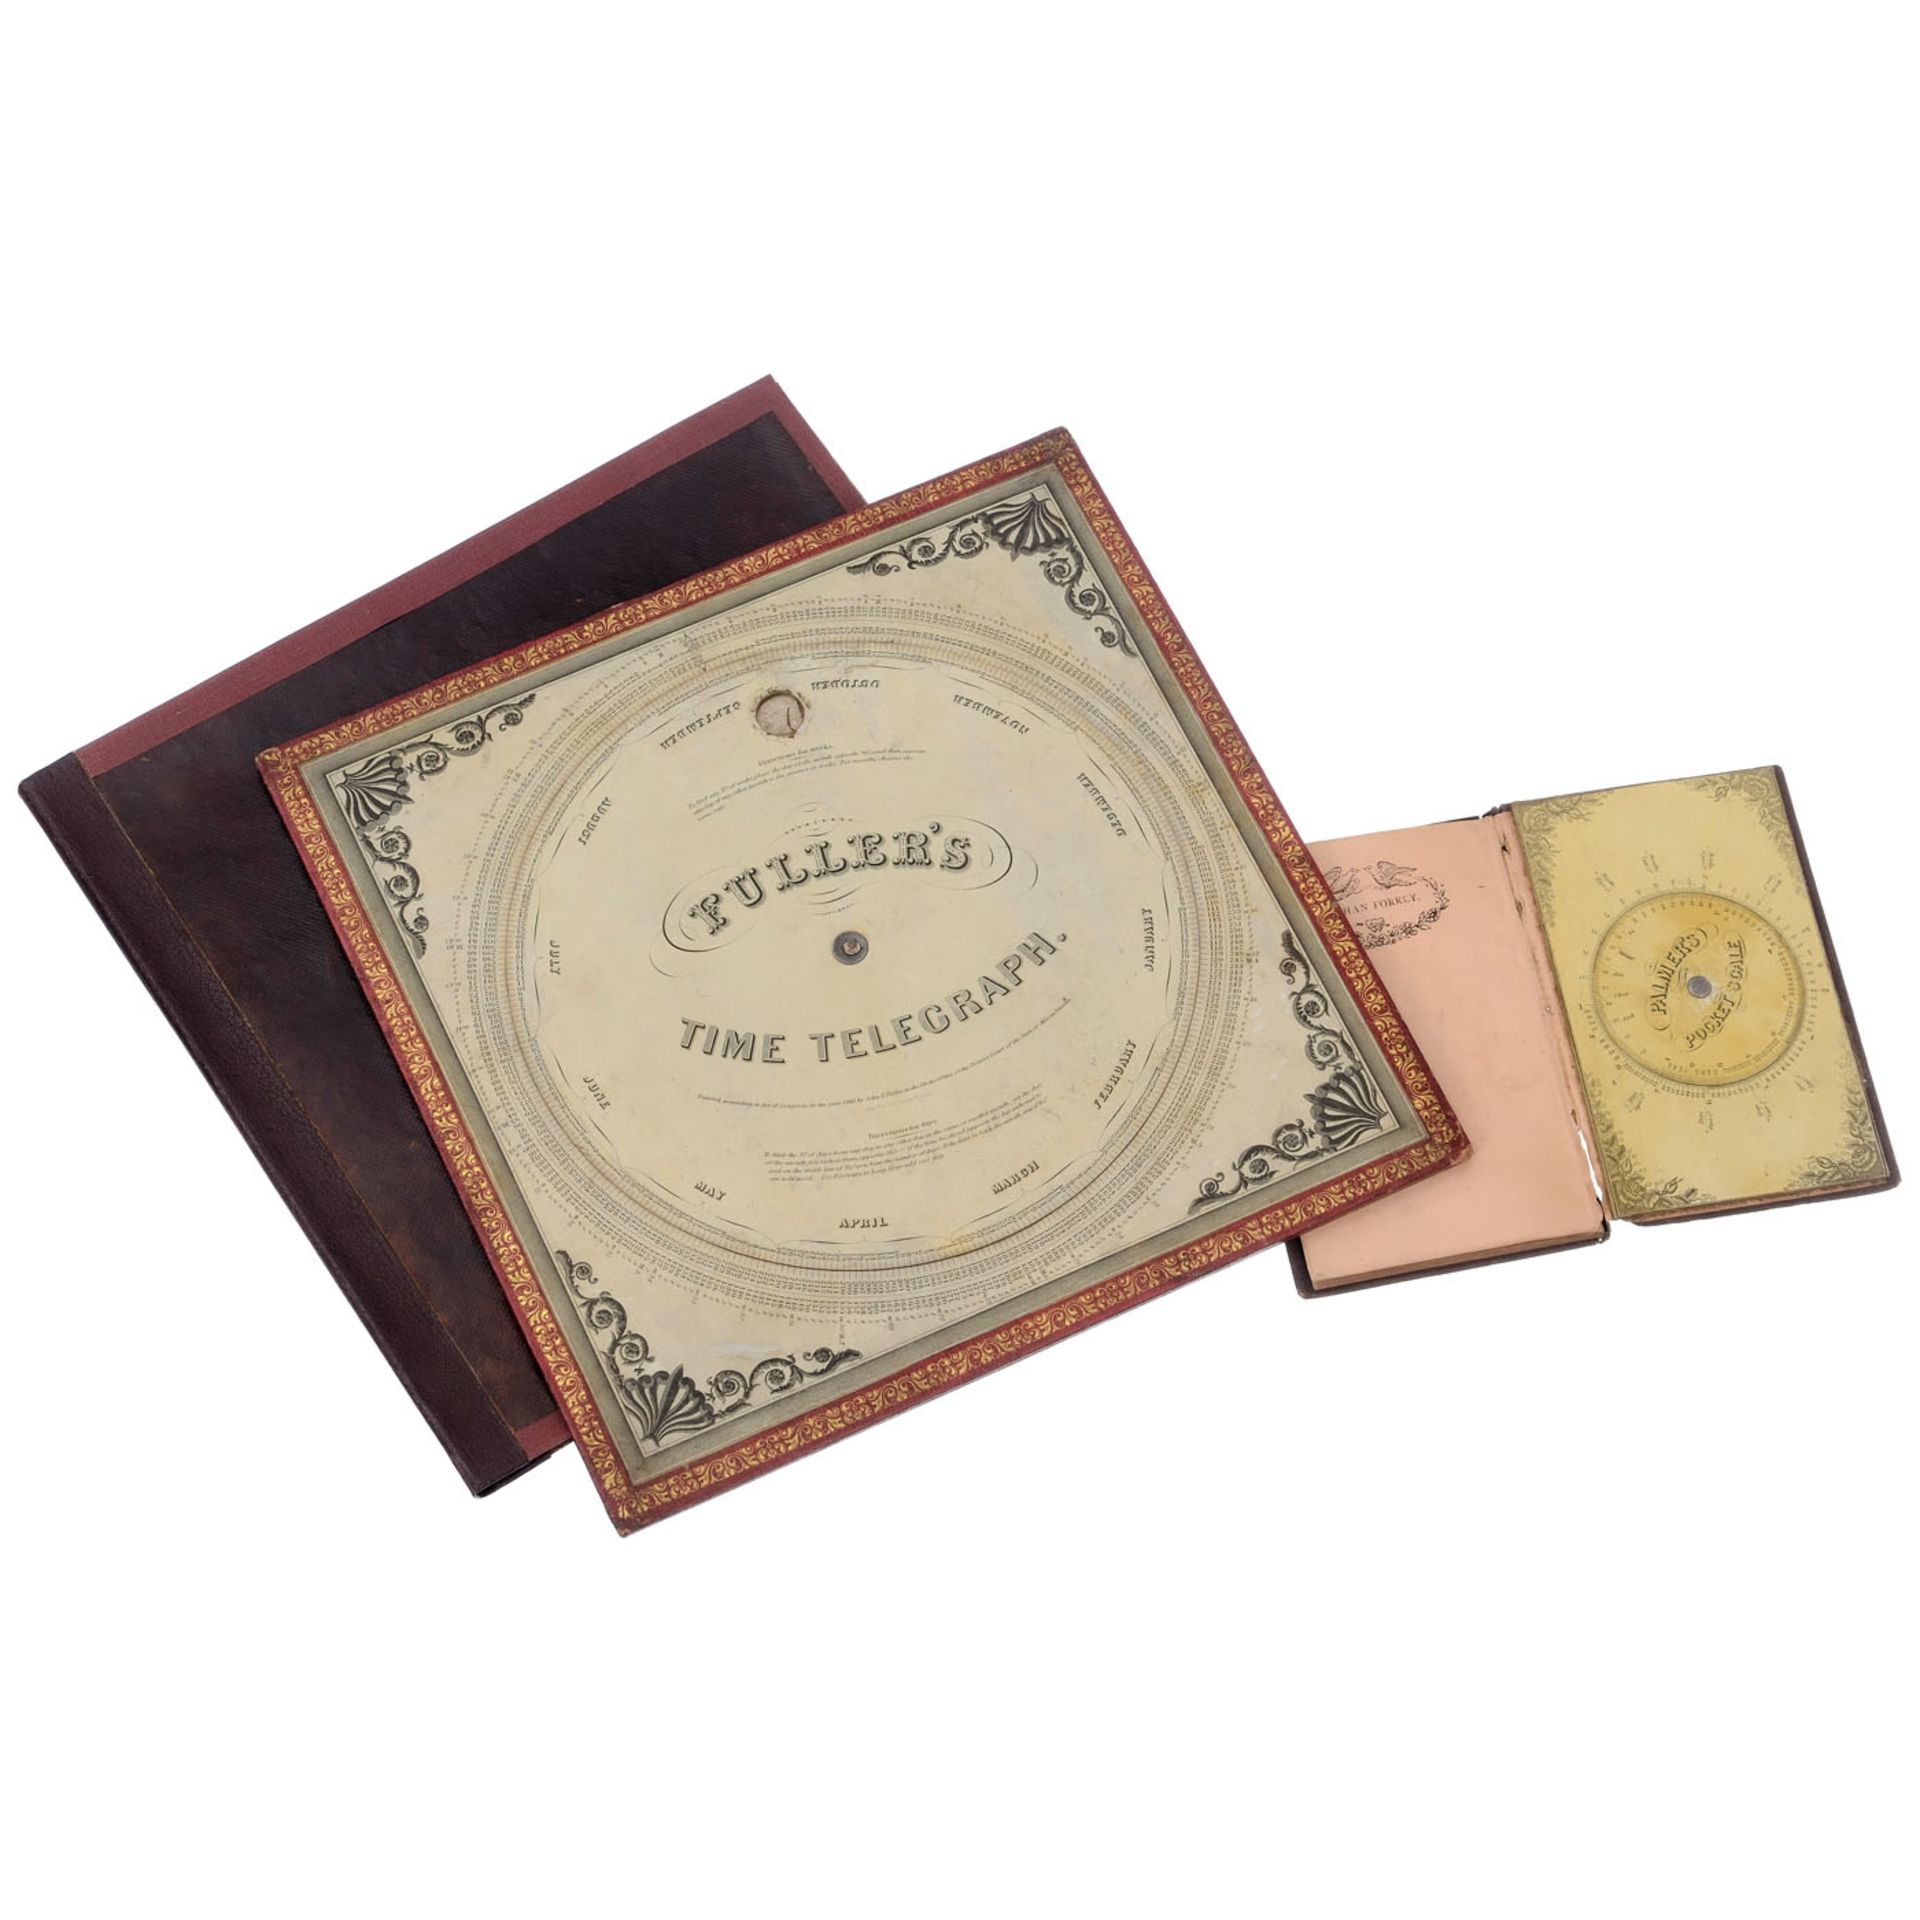 Fuller's Computing Telegraph and Palmer's Pocket Scale - Image 2 of 7